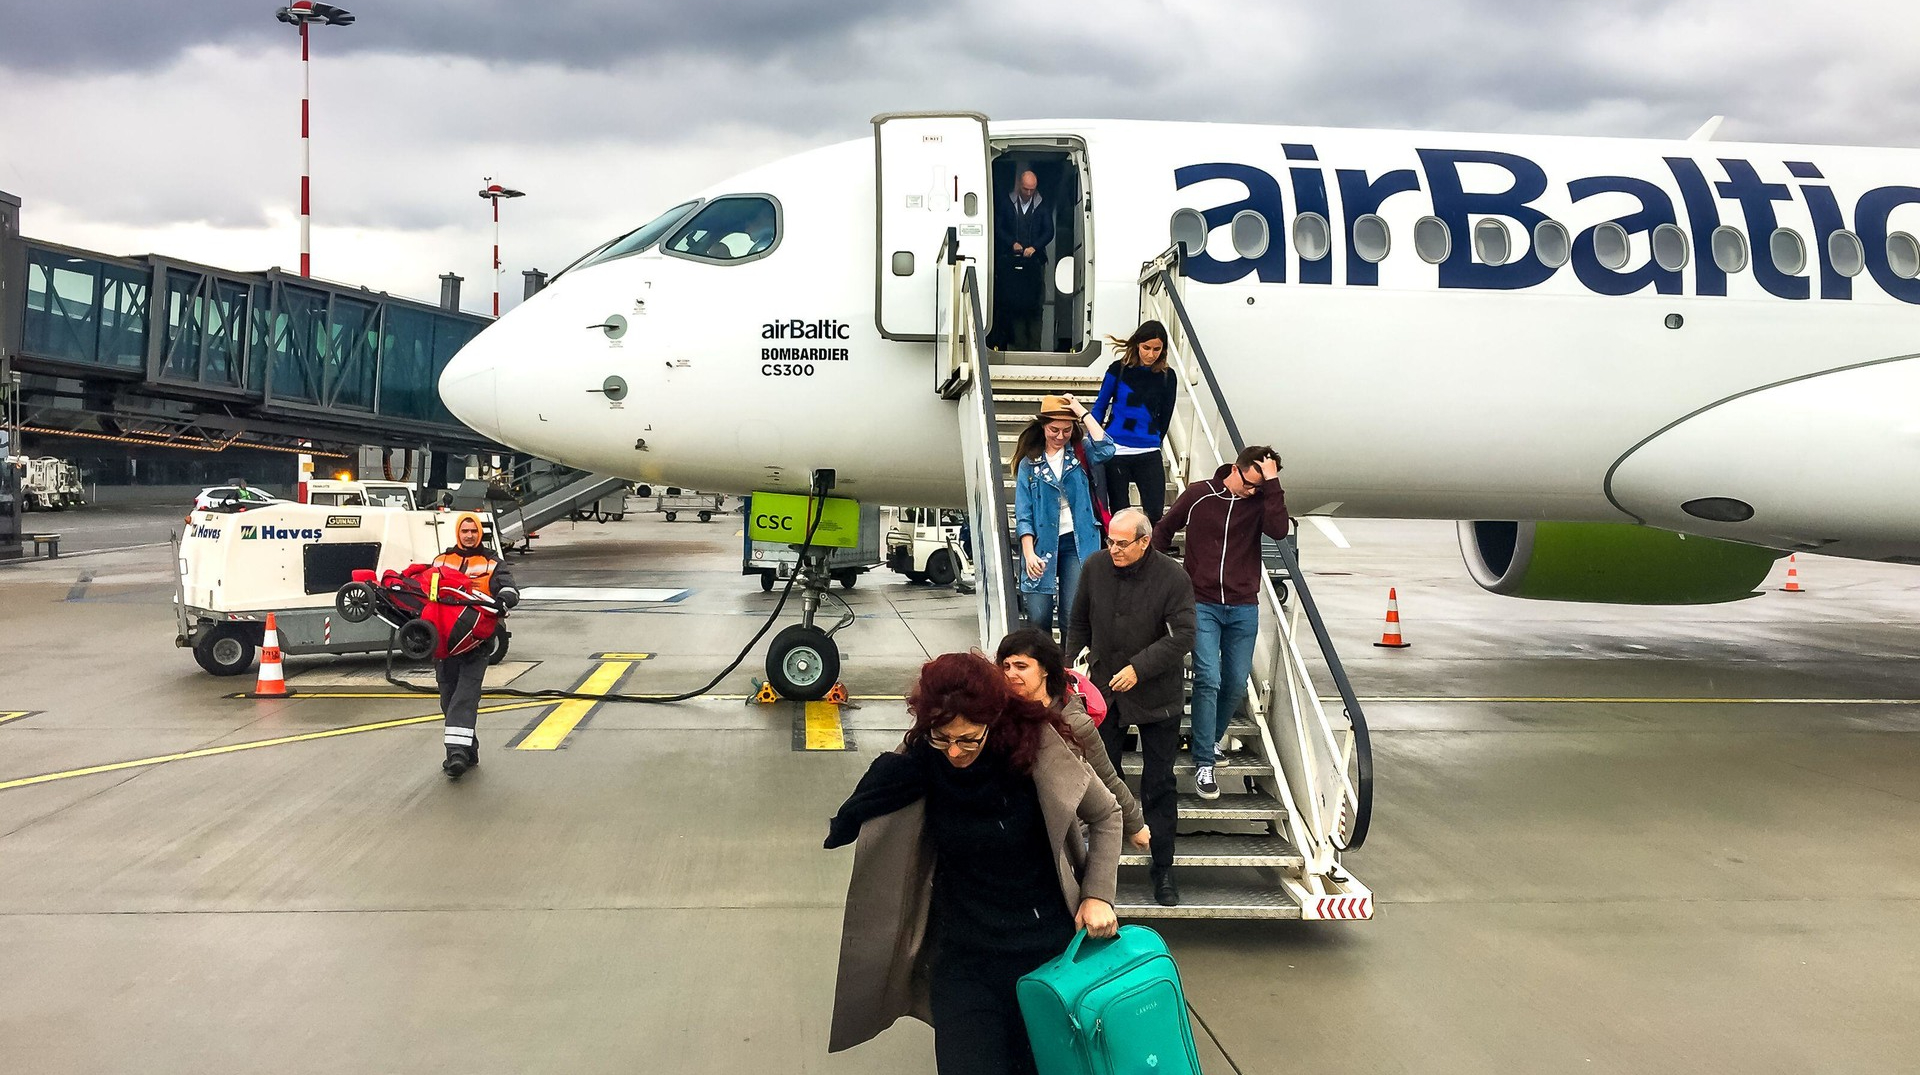 When the plane arrived. AIRBALTIC флешмобы.